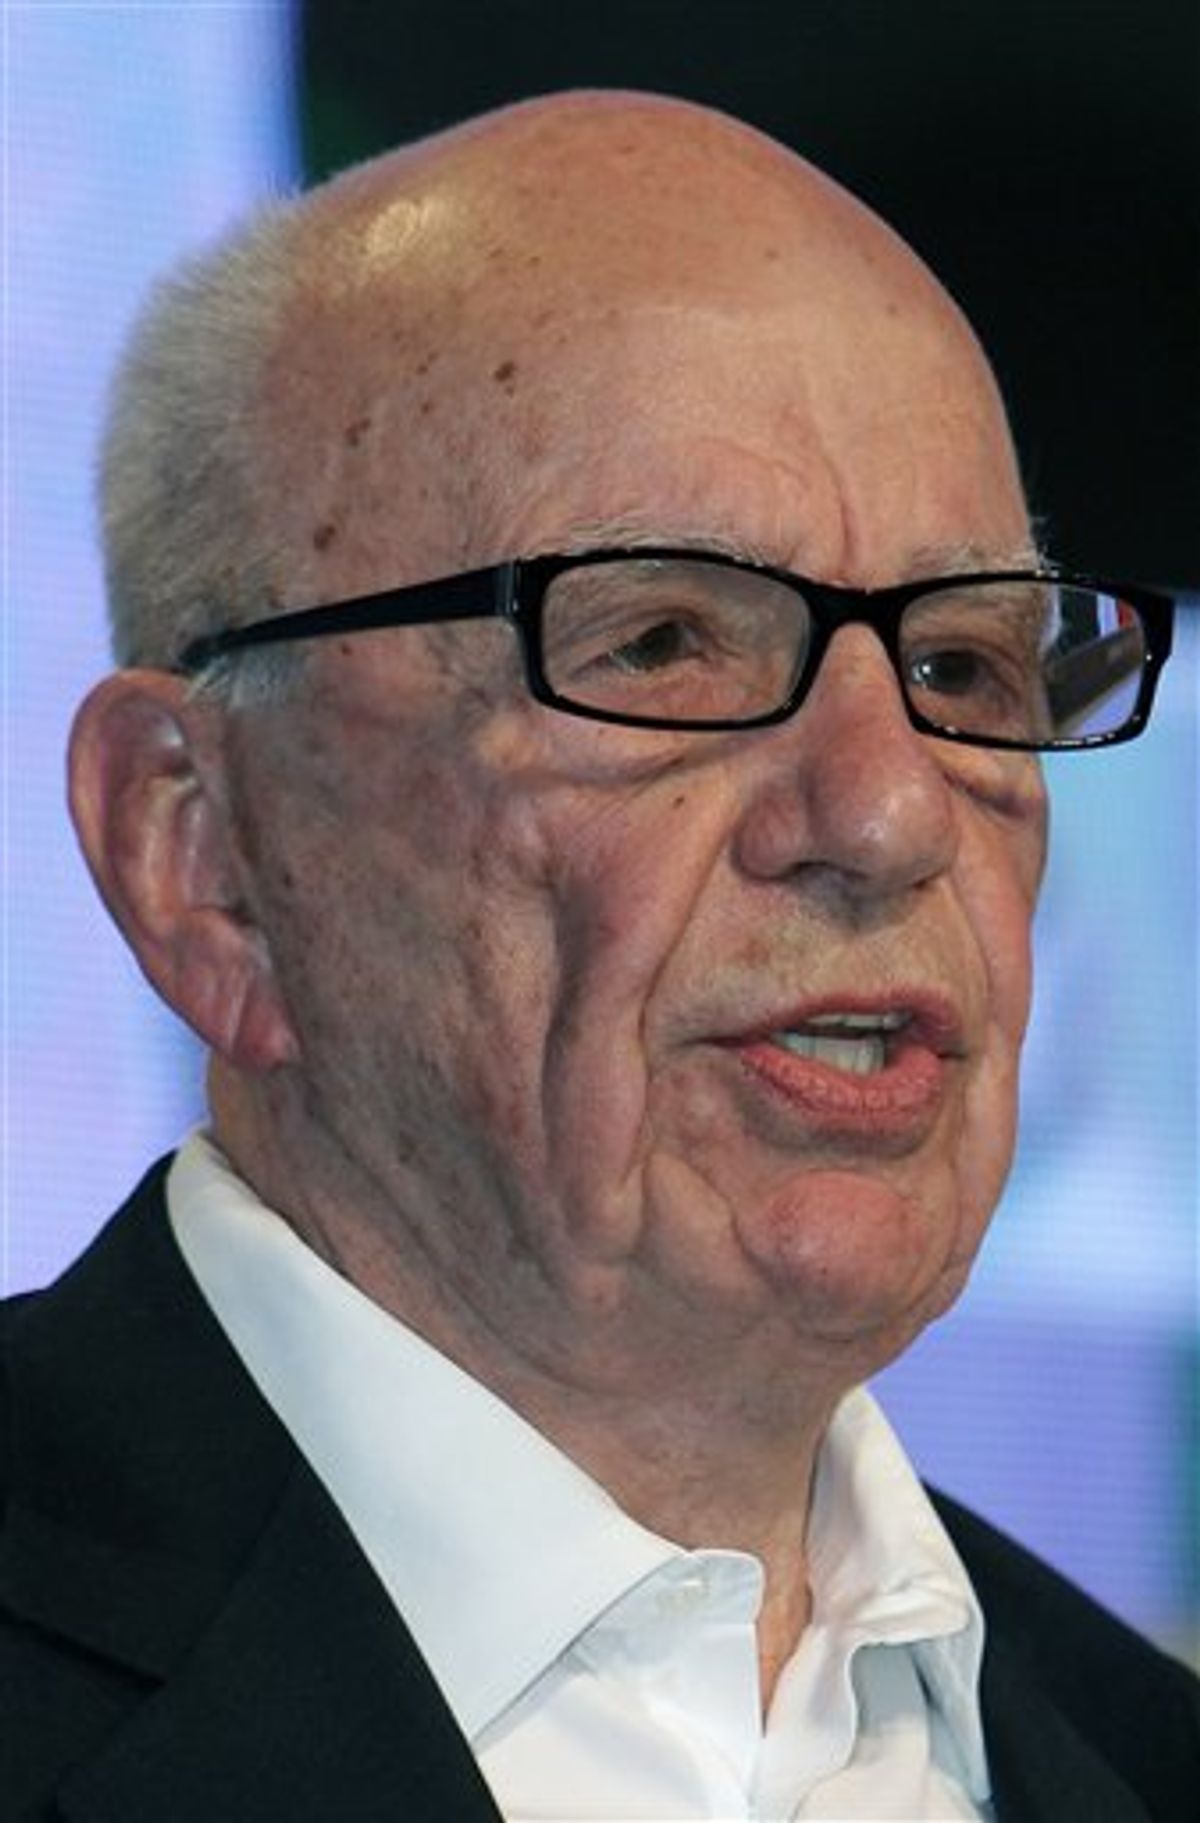 FILE - In this May 24, 2011 file photo, media magnate Rupert Murdoch speaks during the e-G8 conference, gathering Internet and information technologies leaders and experts, in Paris. Britain's prime minister demanded inquiries into a burgeoning phone hacking scandal as allegations mounted Wednesday, July 6, 2011, that a tabloid eavesdropped on missing schoolgirls and the families of terrorist bombing victims as well as celebrities and royals. The scandal poses a threat to Murdoch's global media empire, and is causing a growing number of companies to pull their ads from the News of the World tabloid in disgust. In addition, calls are mounting for Rebekah Brooks, Murdoch's top executive in Britain, to step down. (AP Photo/Bob Edme, File)  (AP)